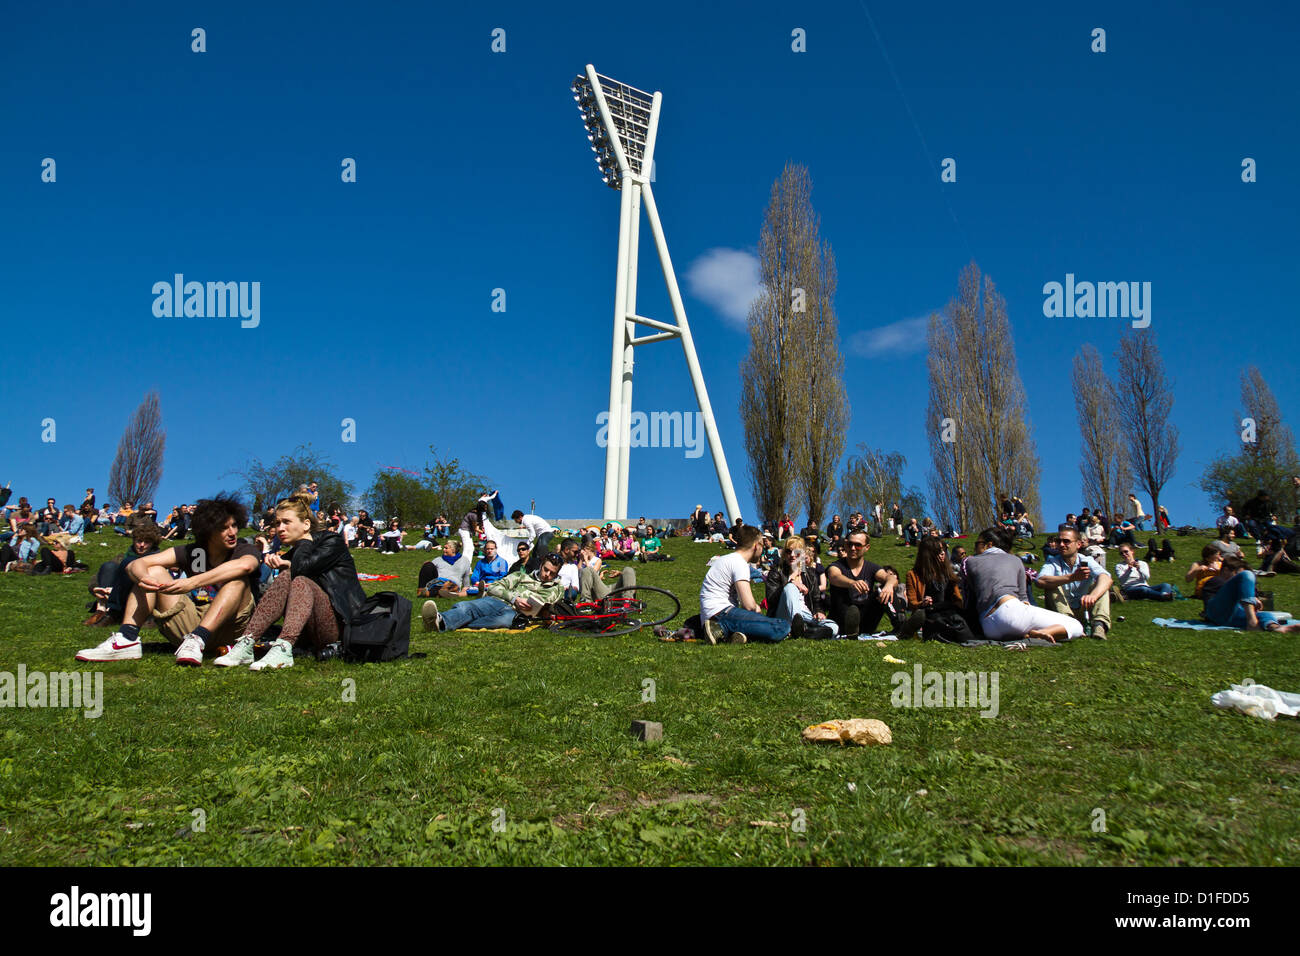 Young People enjoying a sunny Sunday Afternoon in the Berlin Mauerpark, Germany Stock Photo